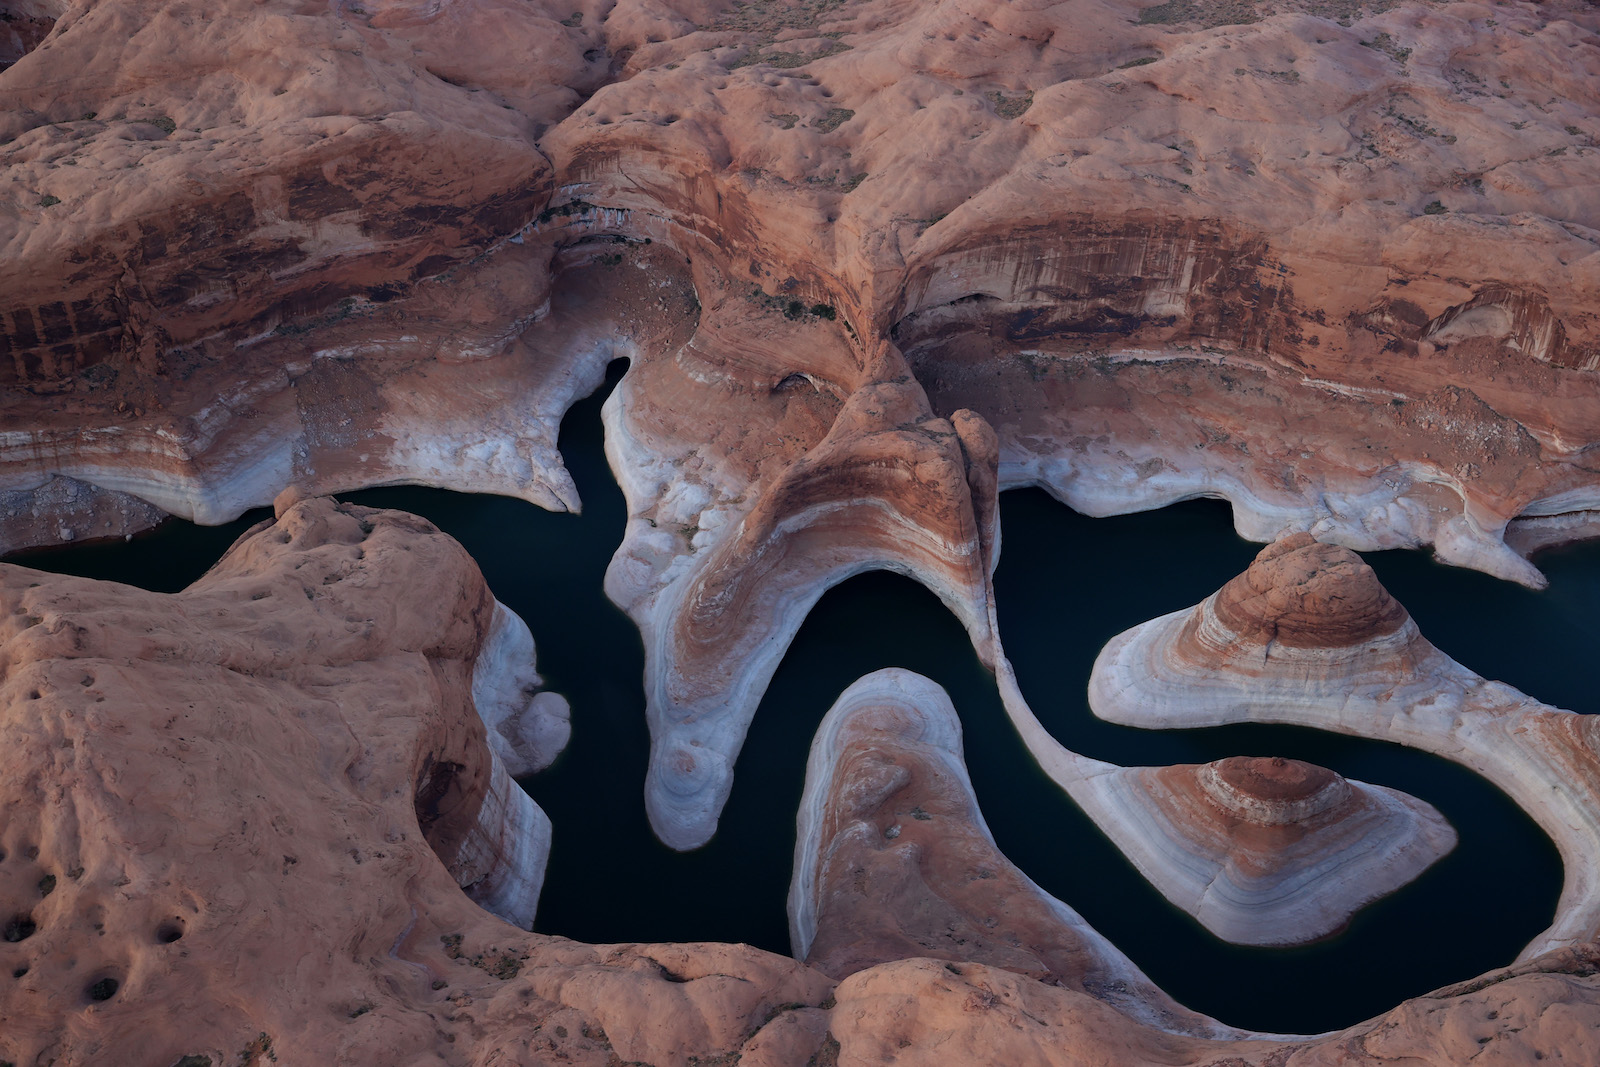 An aerial view of a very bendy portion of river with a ring of bleached rock marking water retreat due to drought